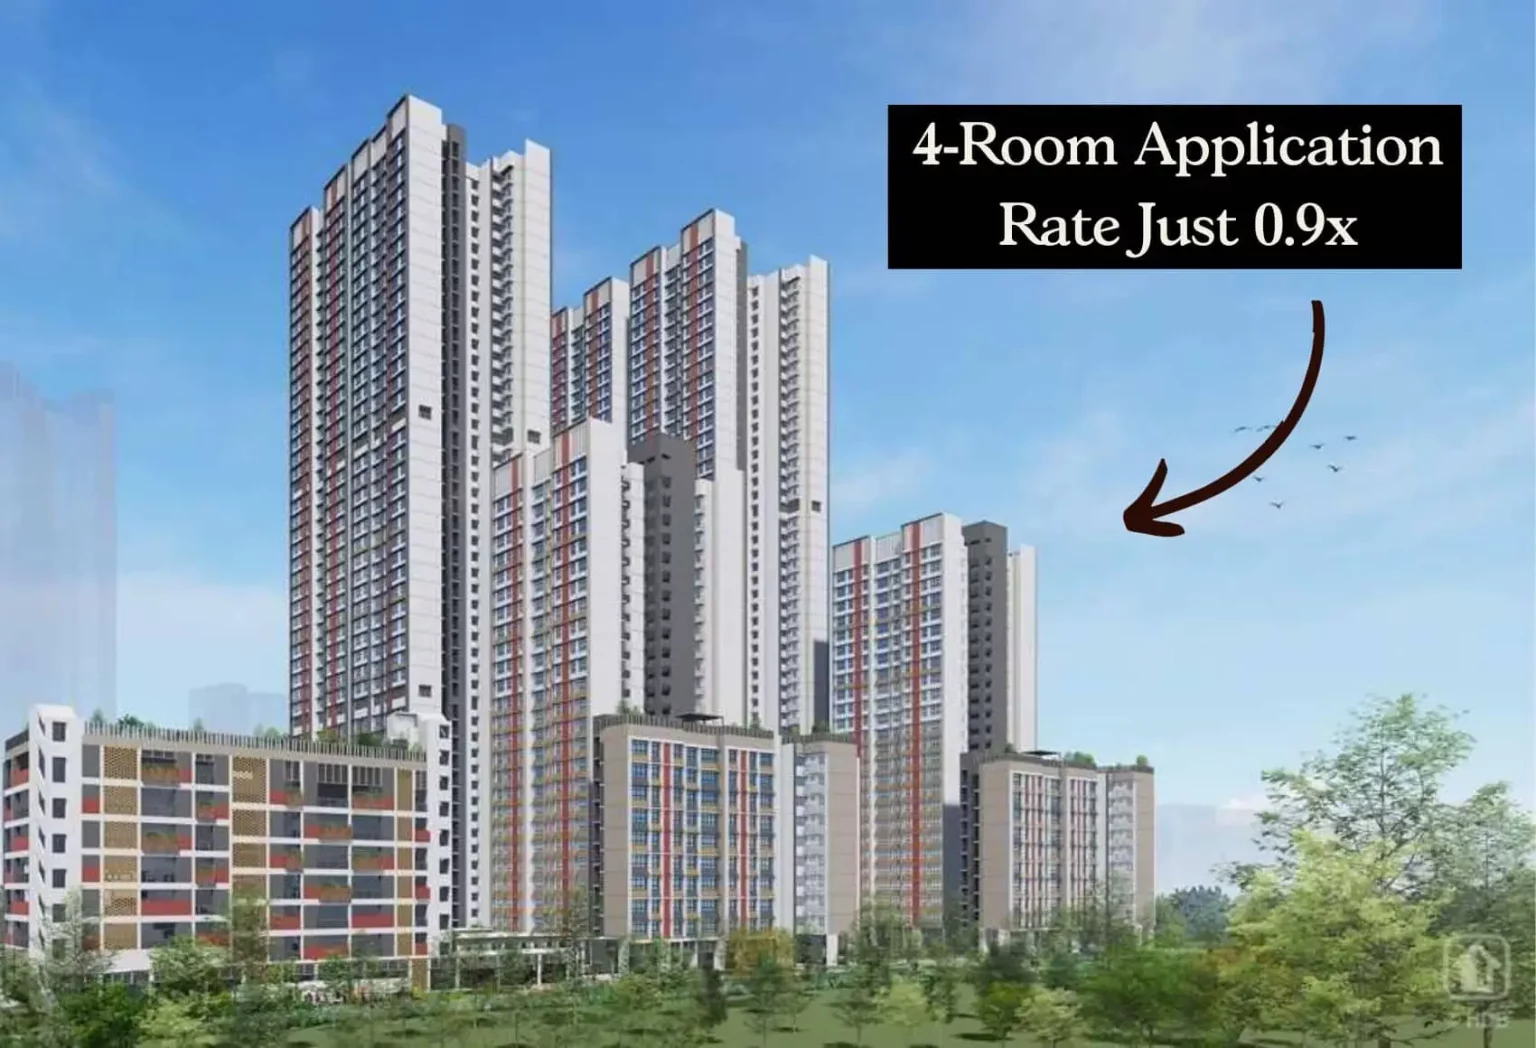 BTO Low Application Rate